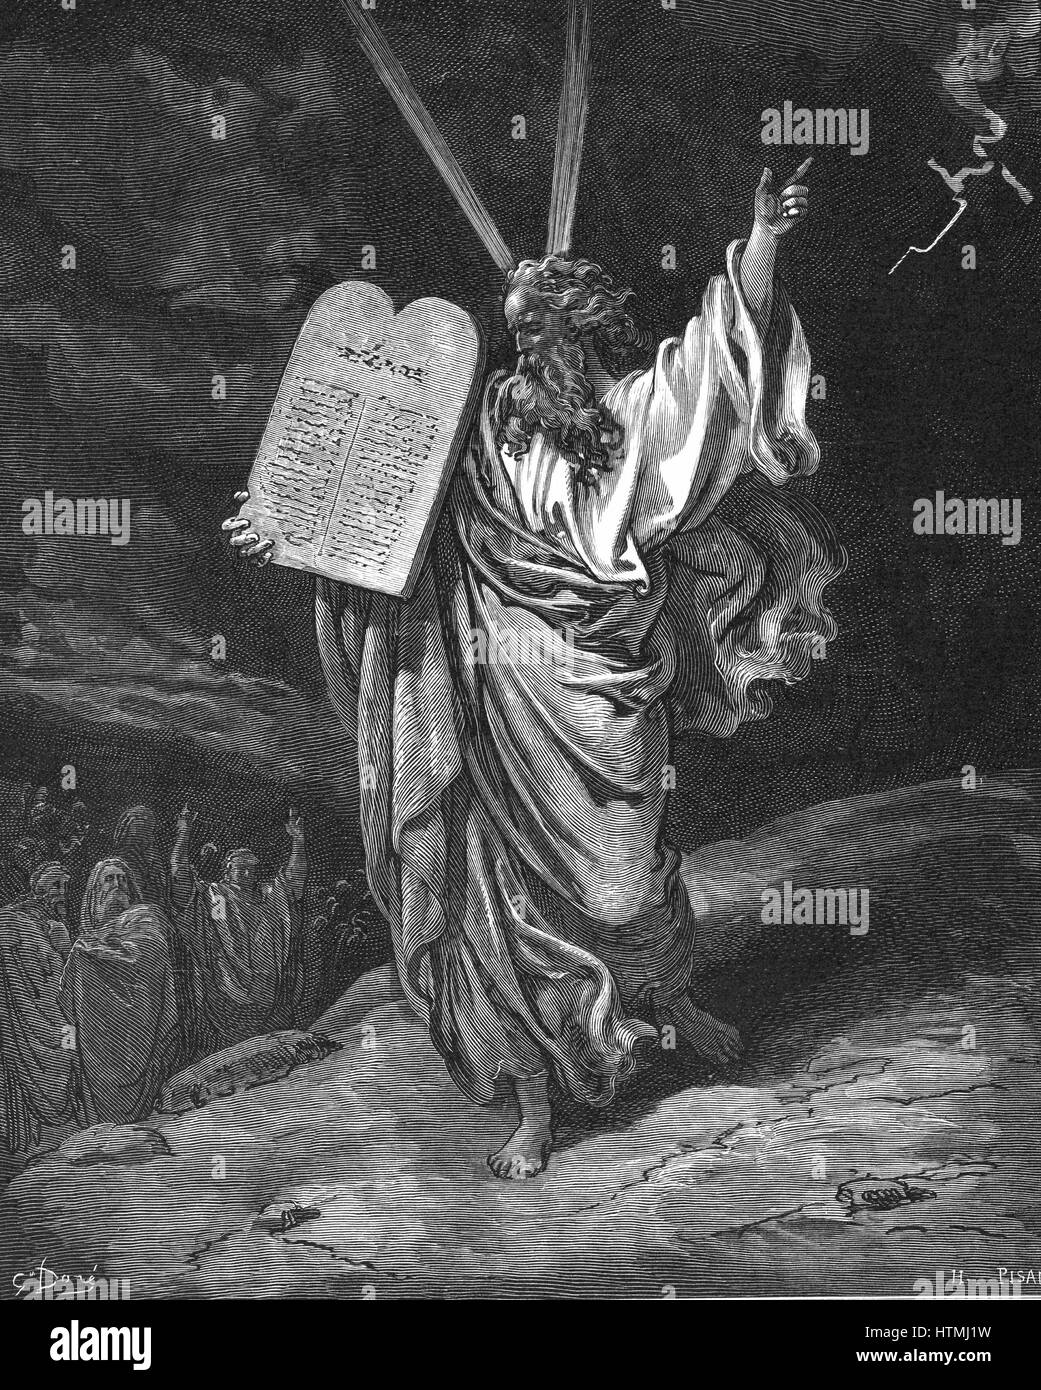 Moses descending from Mount Sinai with the tablets of the law (Ten Commandments). Exodus 5.35. Illustration by Gustave Dore (1832-1883) for 'The Bible' (London 1866). Wood engraving. Stock Photo